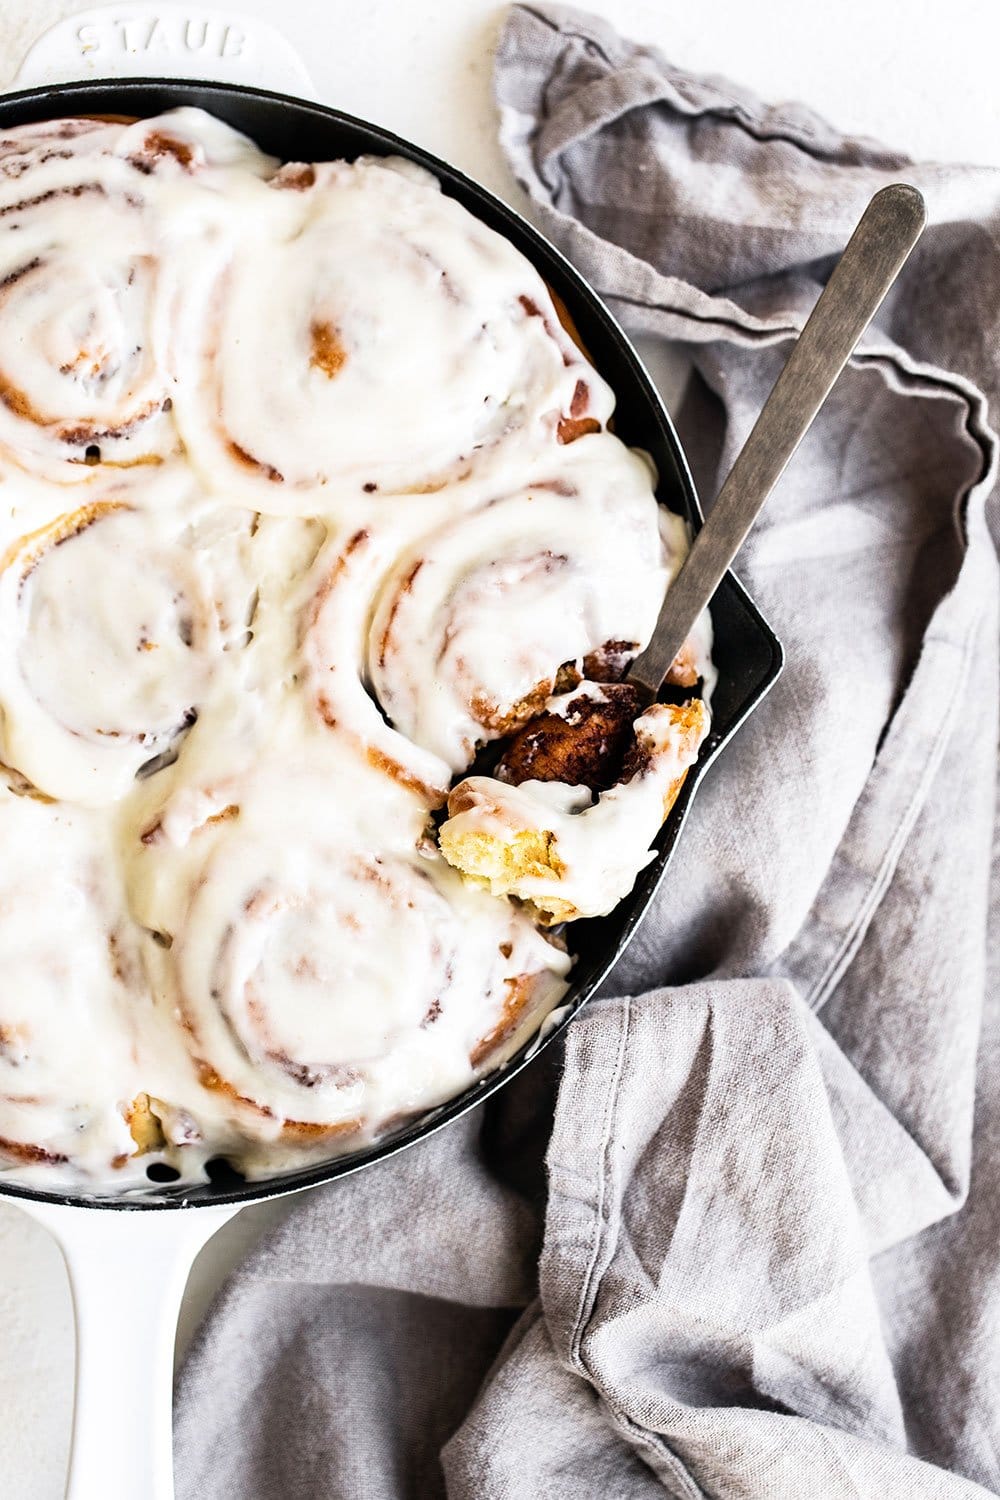 Cast iron pan with cinnamon buns and fork taking bite